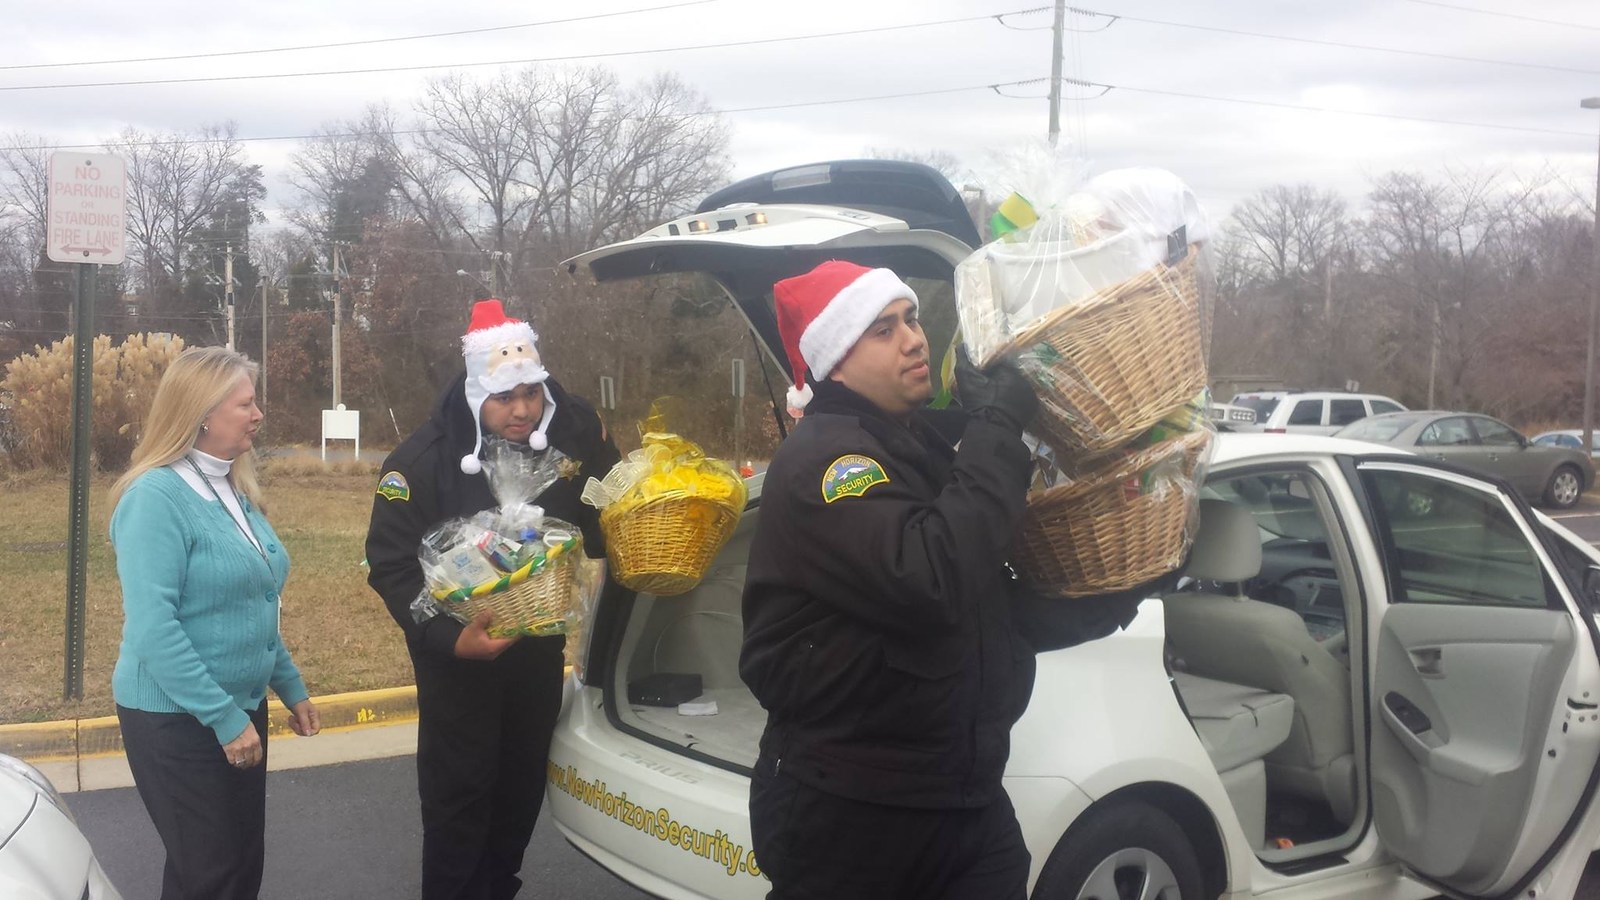 New Horizon Security Officer Smith, Beltran, Decarlo, Cruz and Geter helped deliver the baskets.